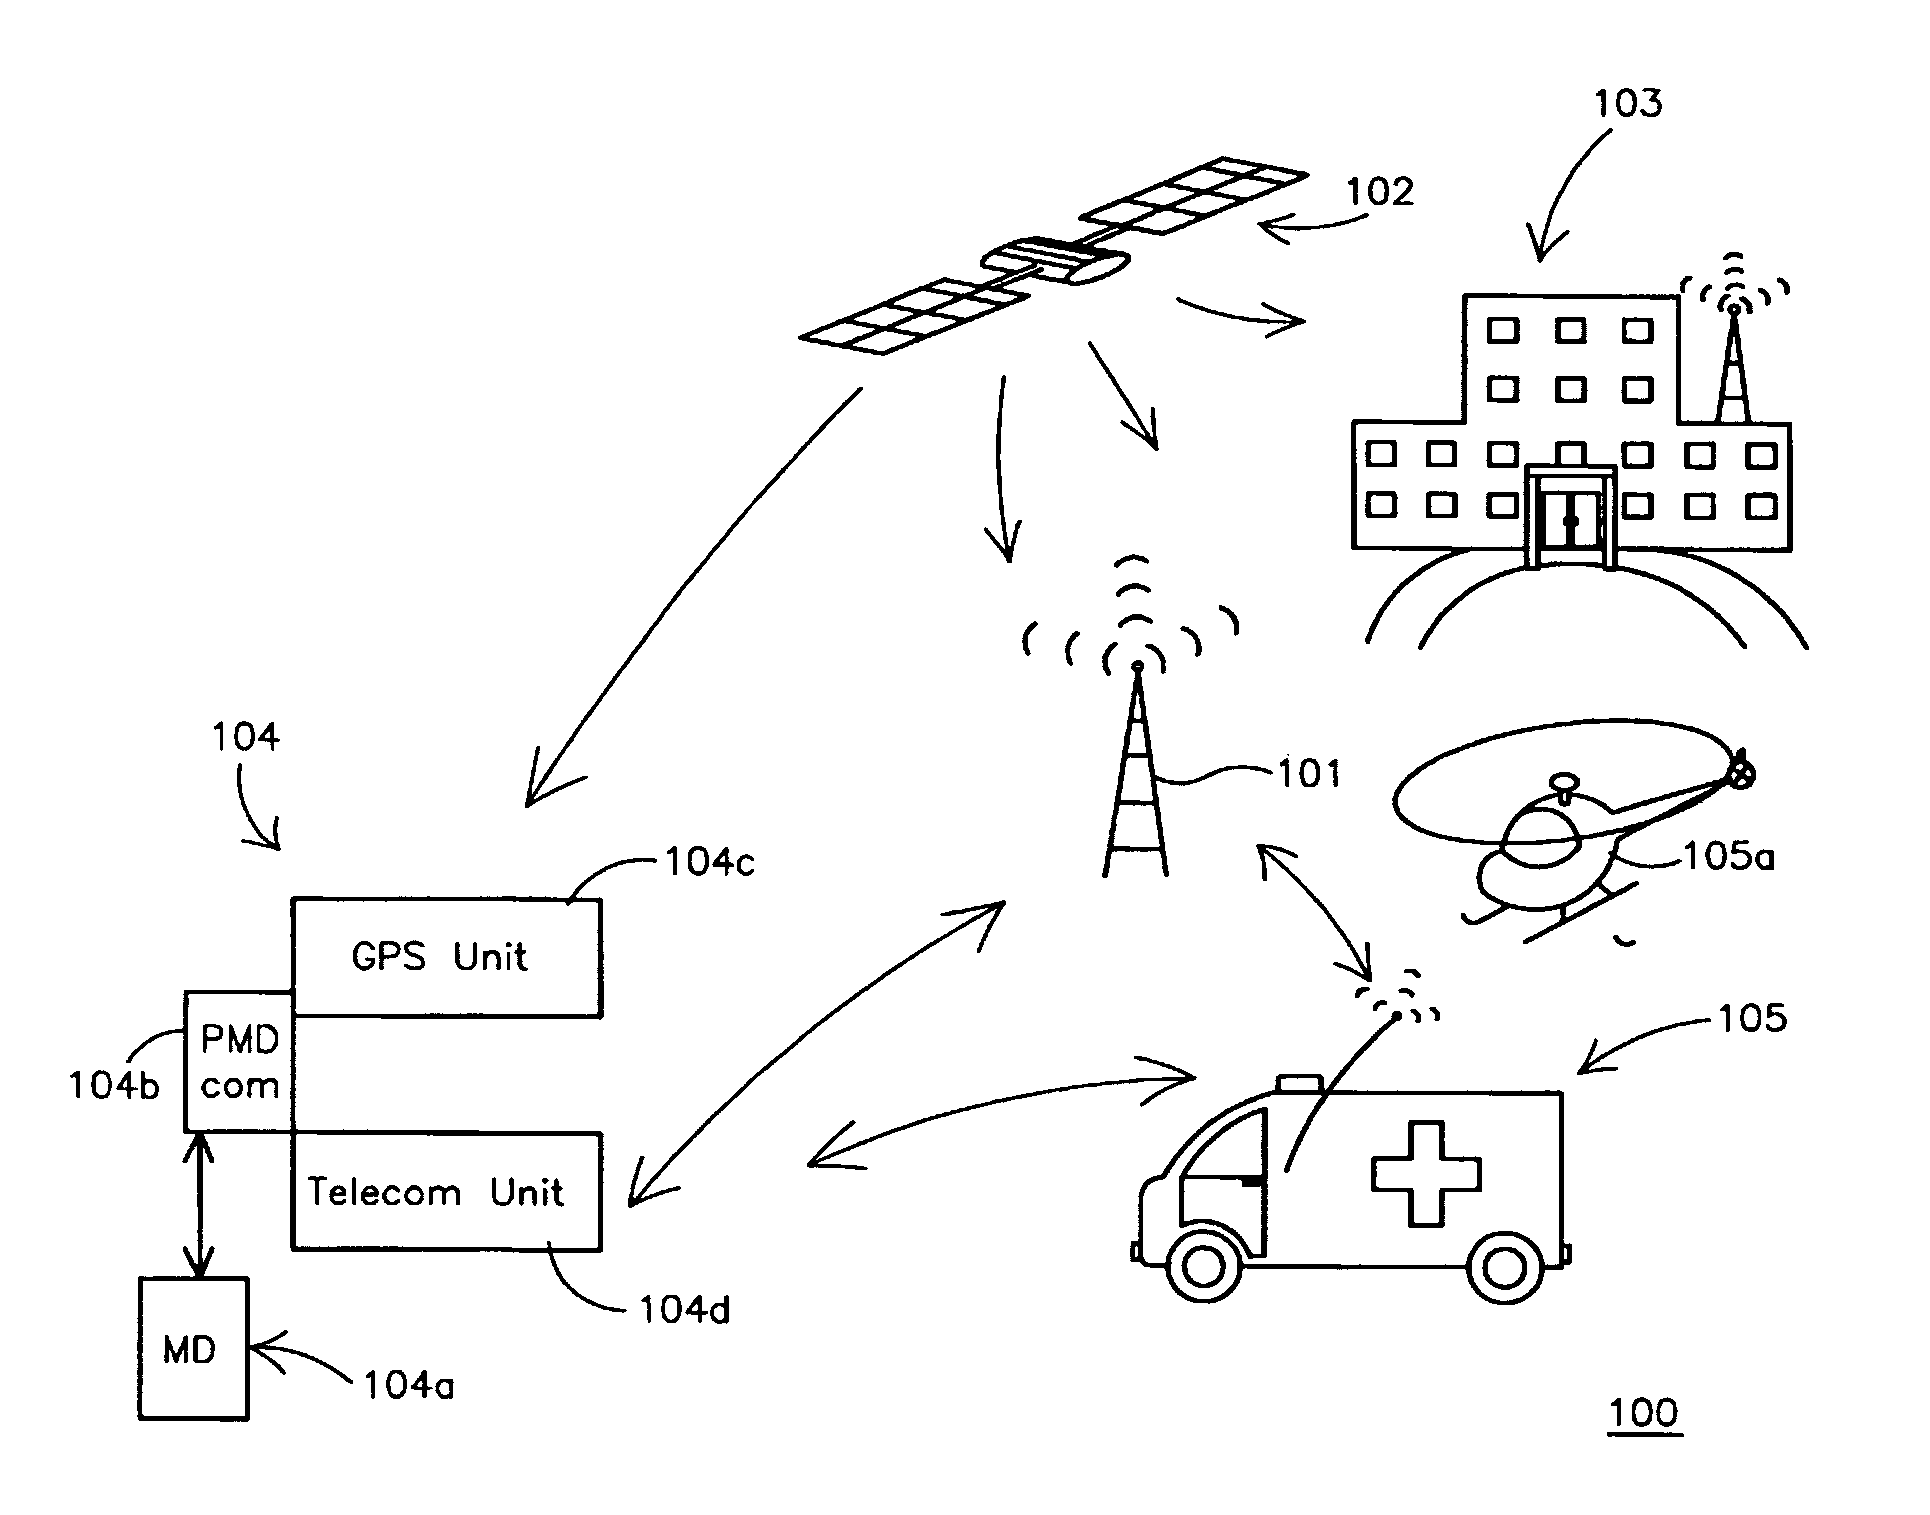 World wide patient location and data telemetry system for implantable medical devices